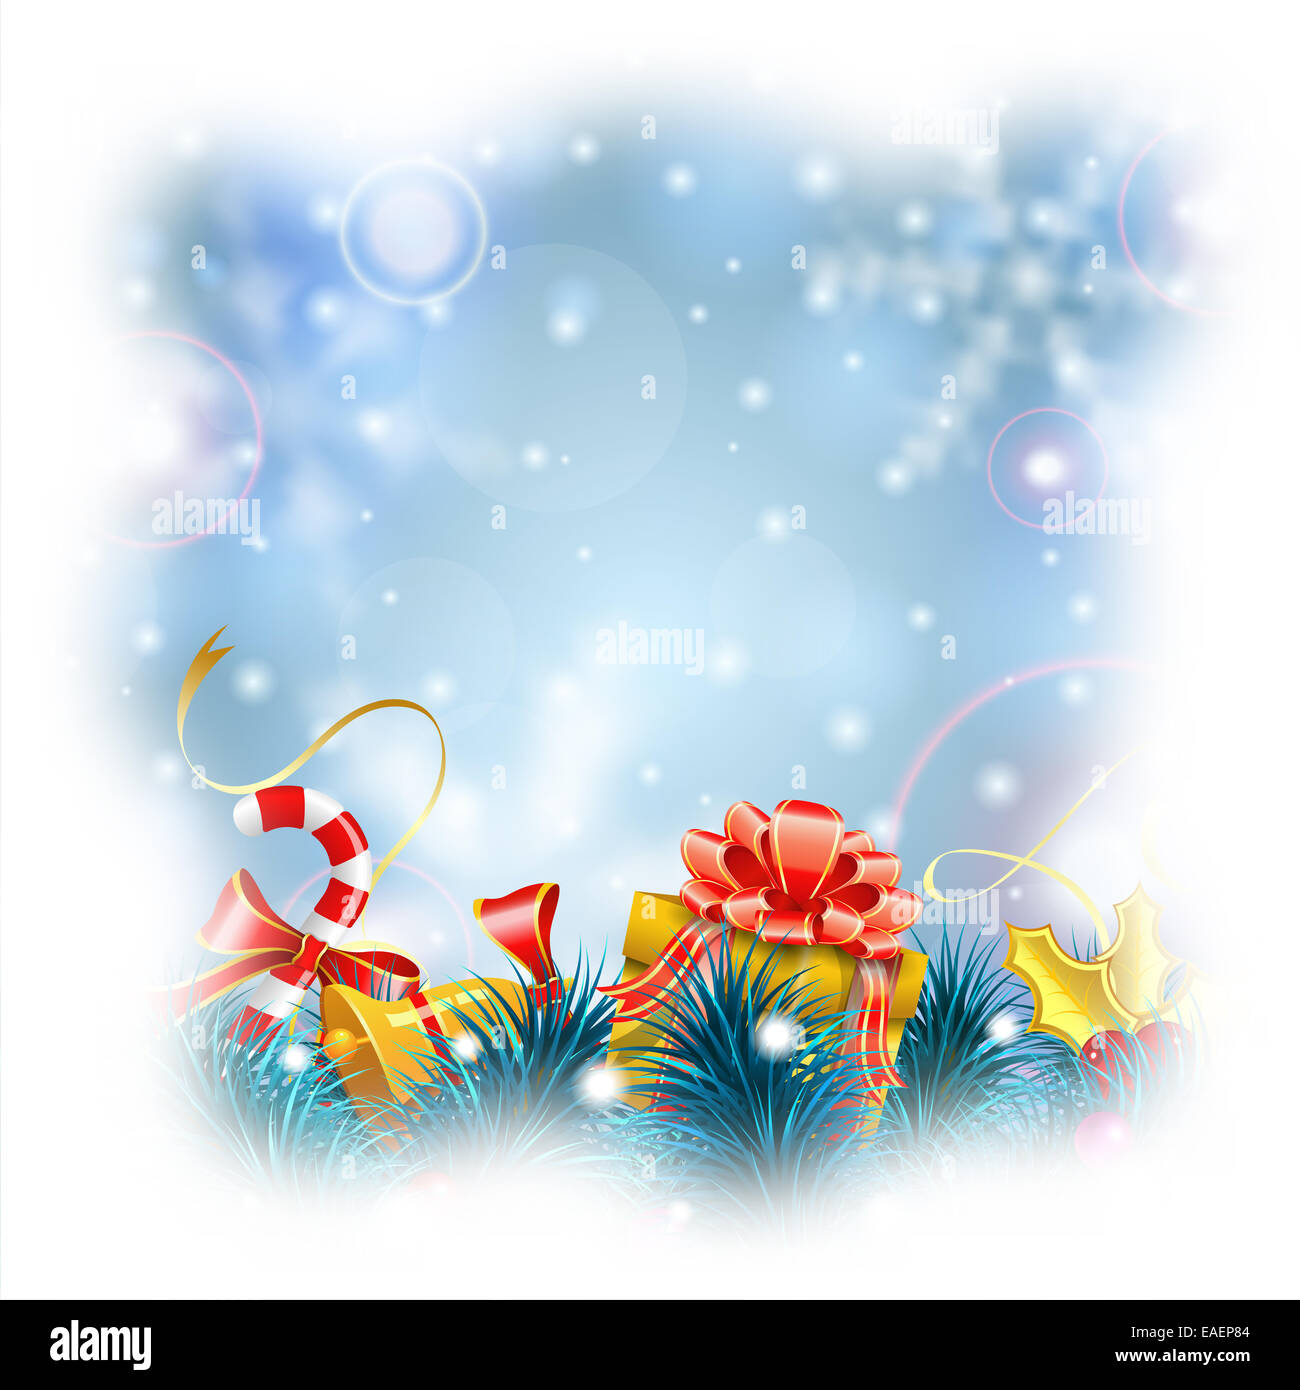 Christmas Blurred Bokeh Background with Snowflakes, Gift, Fir Branches, Gold Streamer and Candy, illustration. Stock Photo